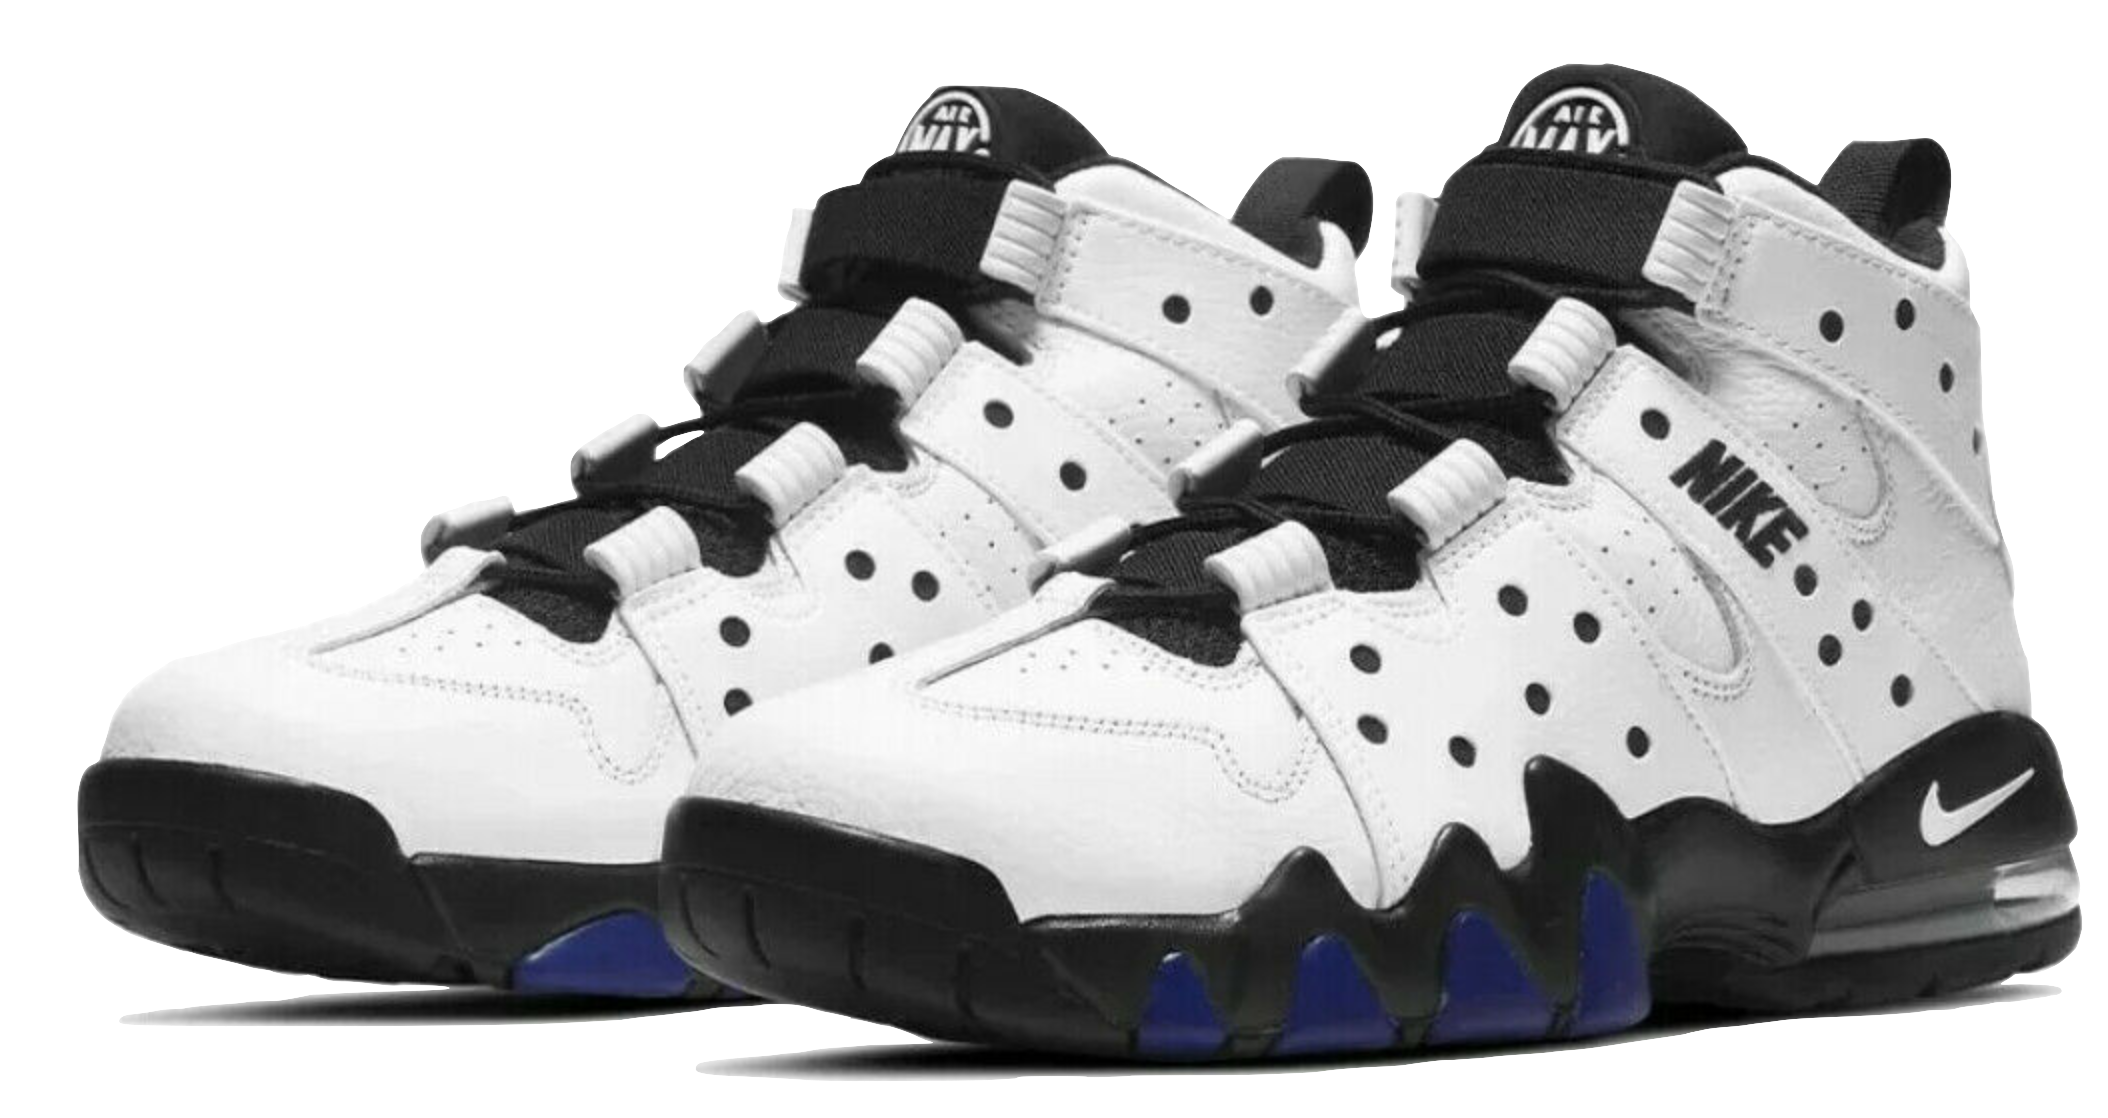 Best Shoe Deals How to Buy The Nike Air Max 2 CB 94 White Black Royal